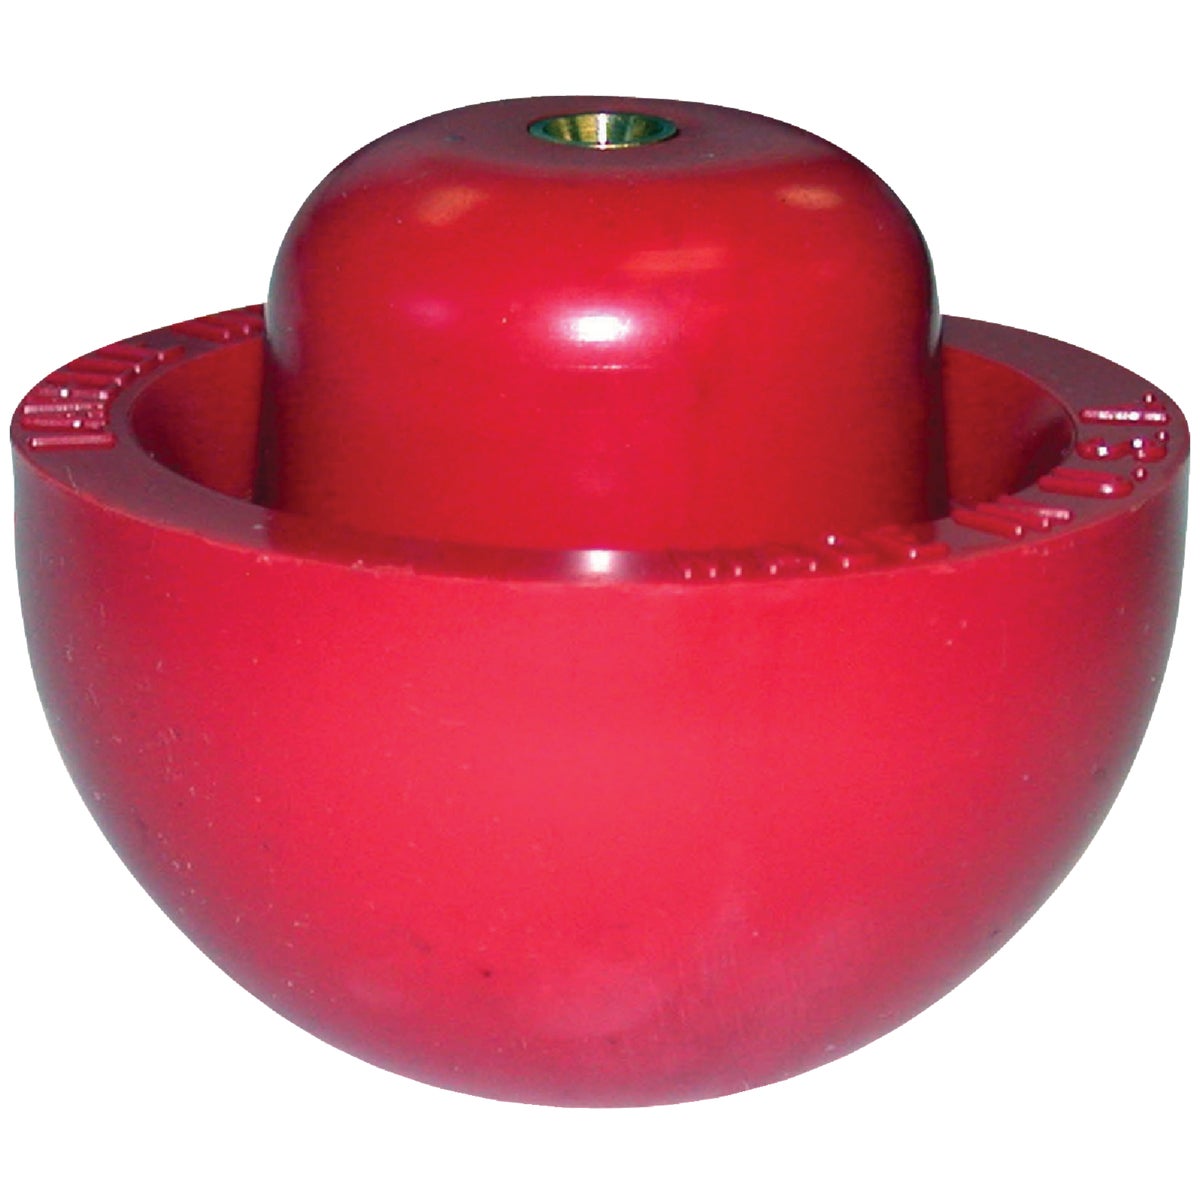 Korky Red Chlorazone Rubber Tank Ball 